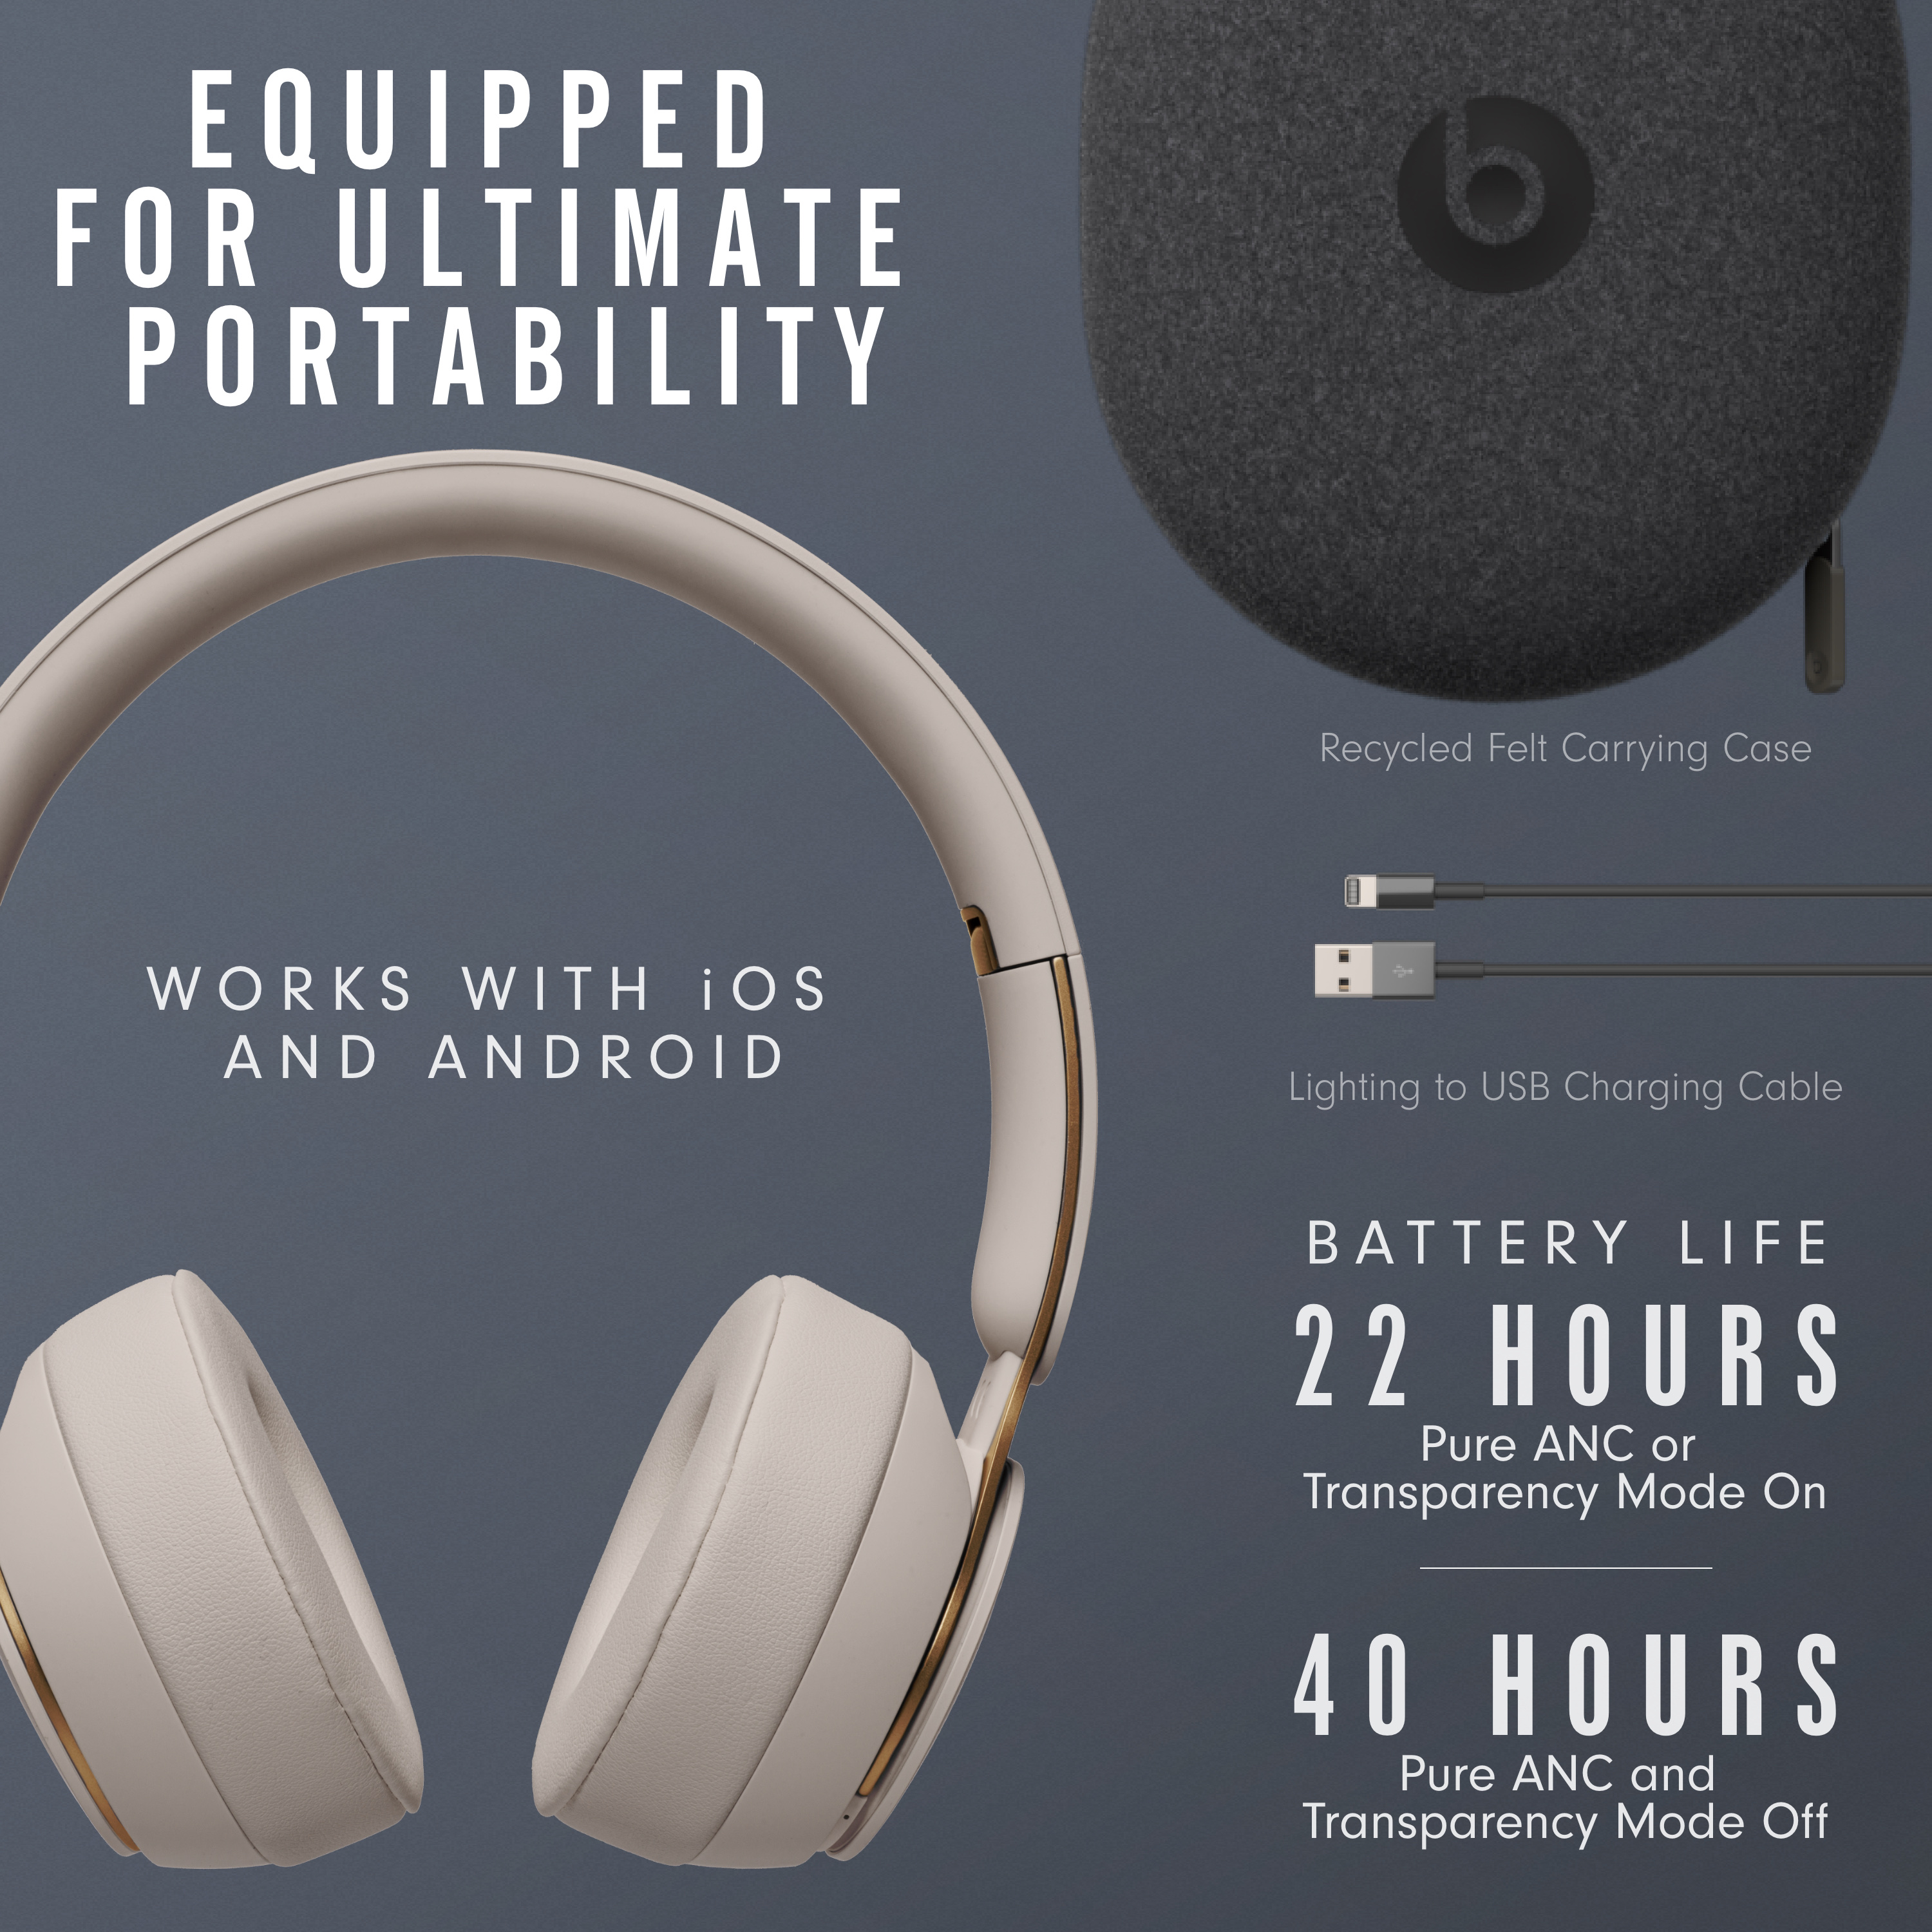 Beats Solo Pro Wireless Noise Cancelling On-Ear Headphones with Apple H1 Headphone Chip - Grey - image 9 of 13